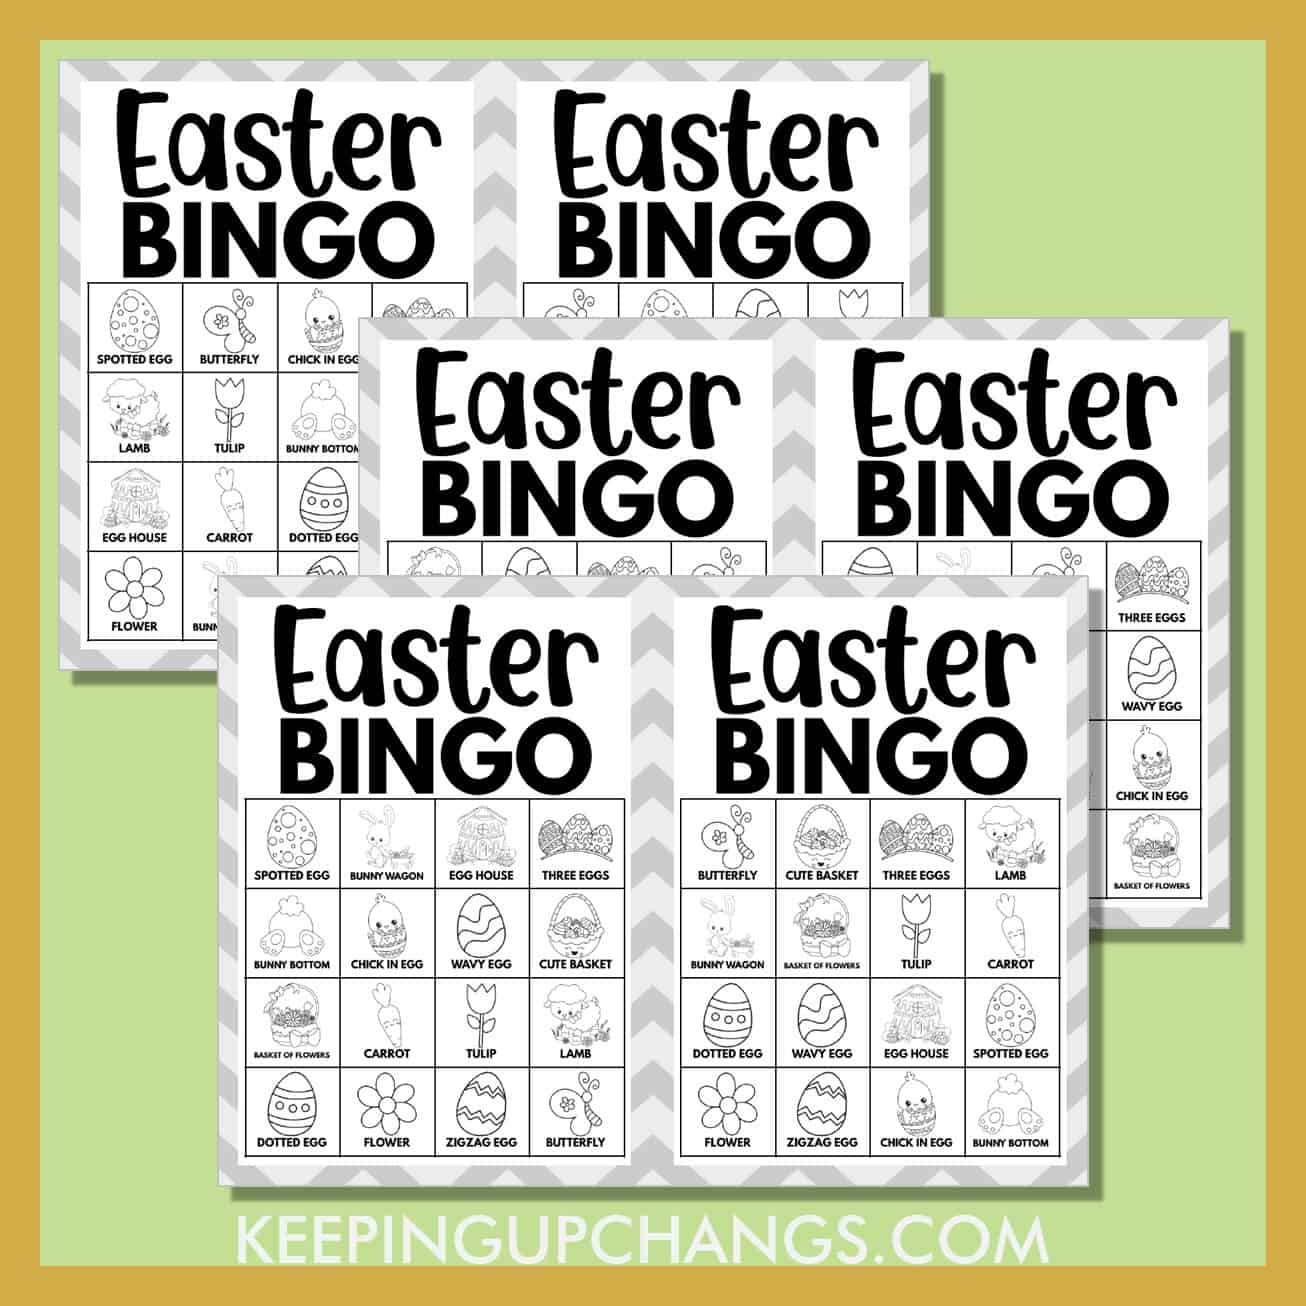 free easter bingo cards 4x4 black white coloring for party, school, group.